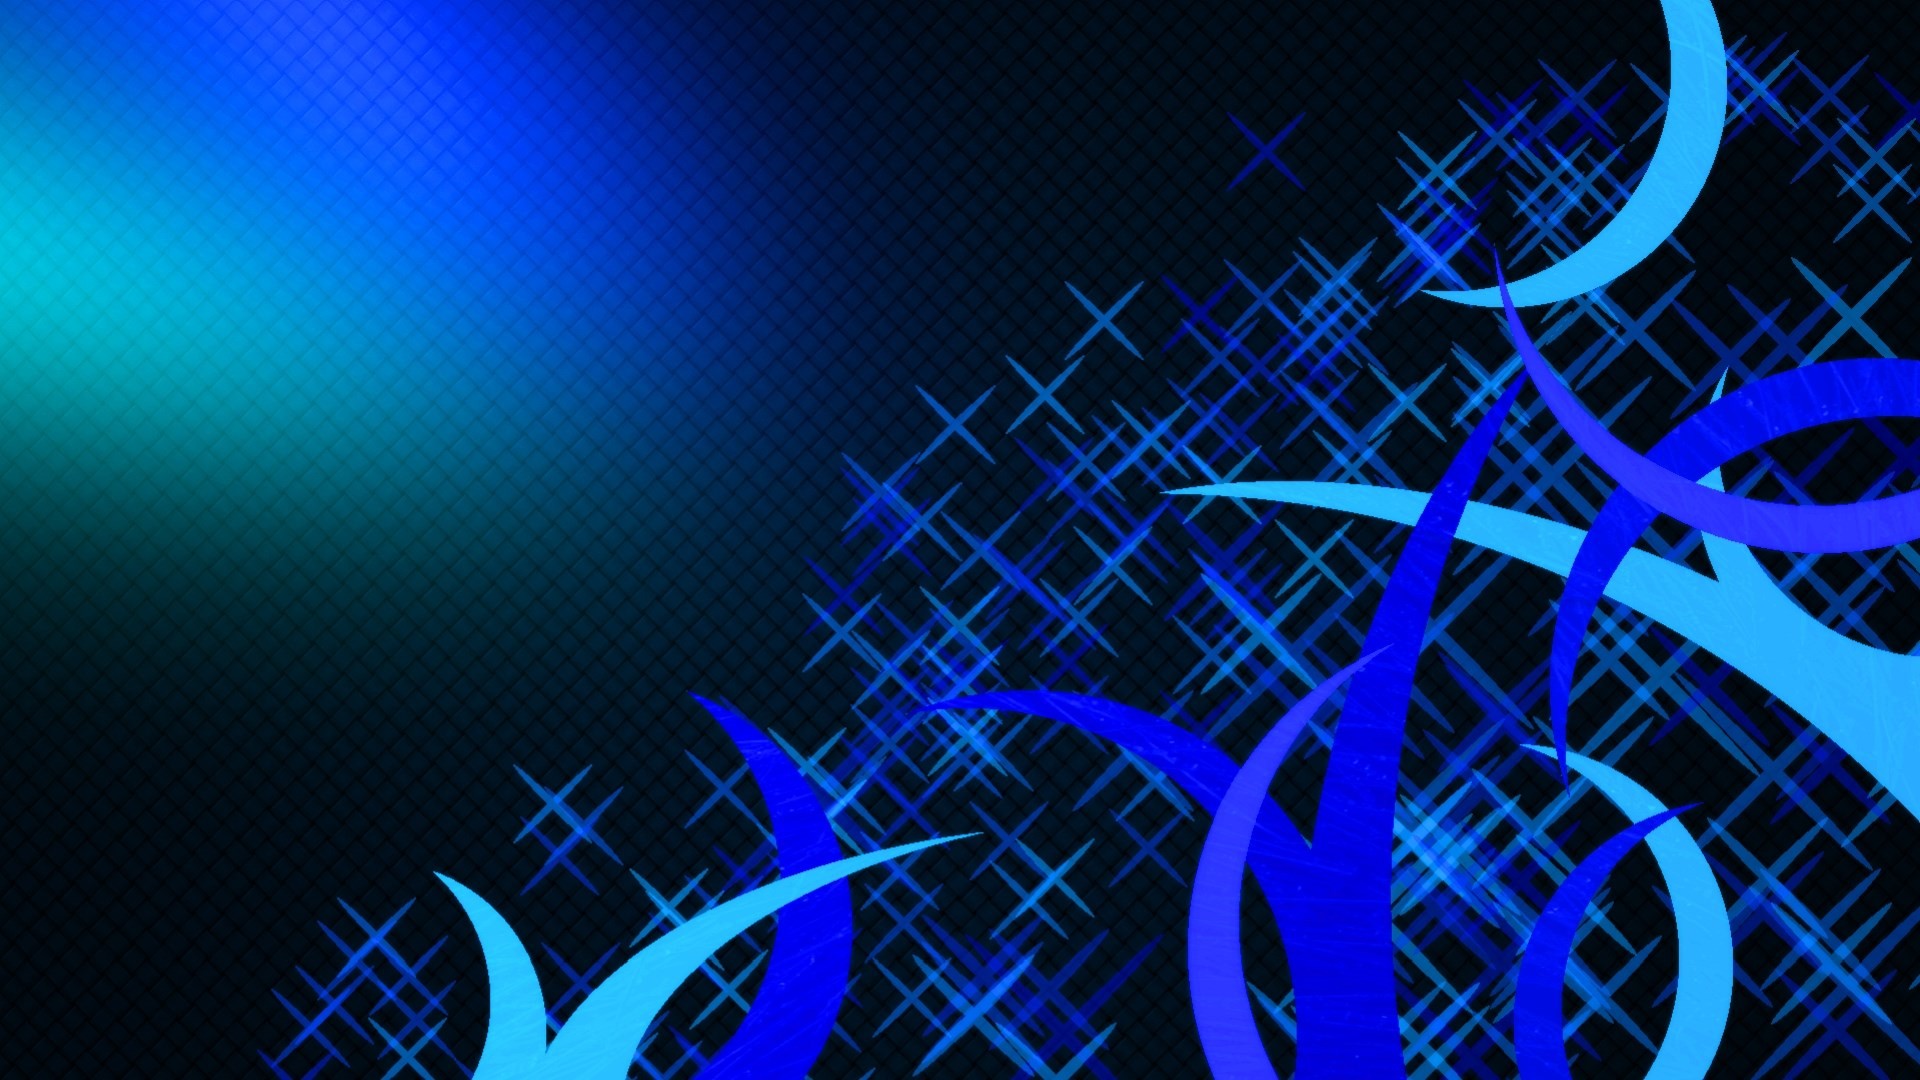 Blue computer wallpaper backgrounds – blue category